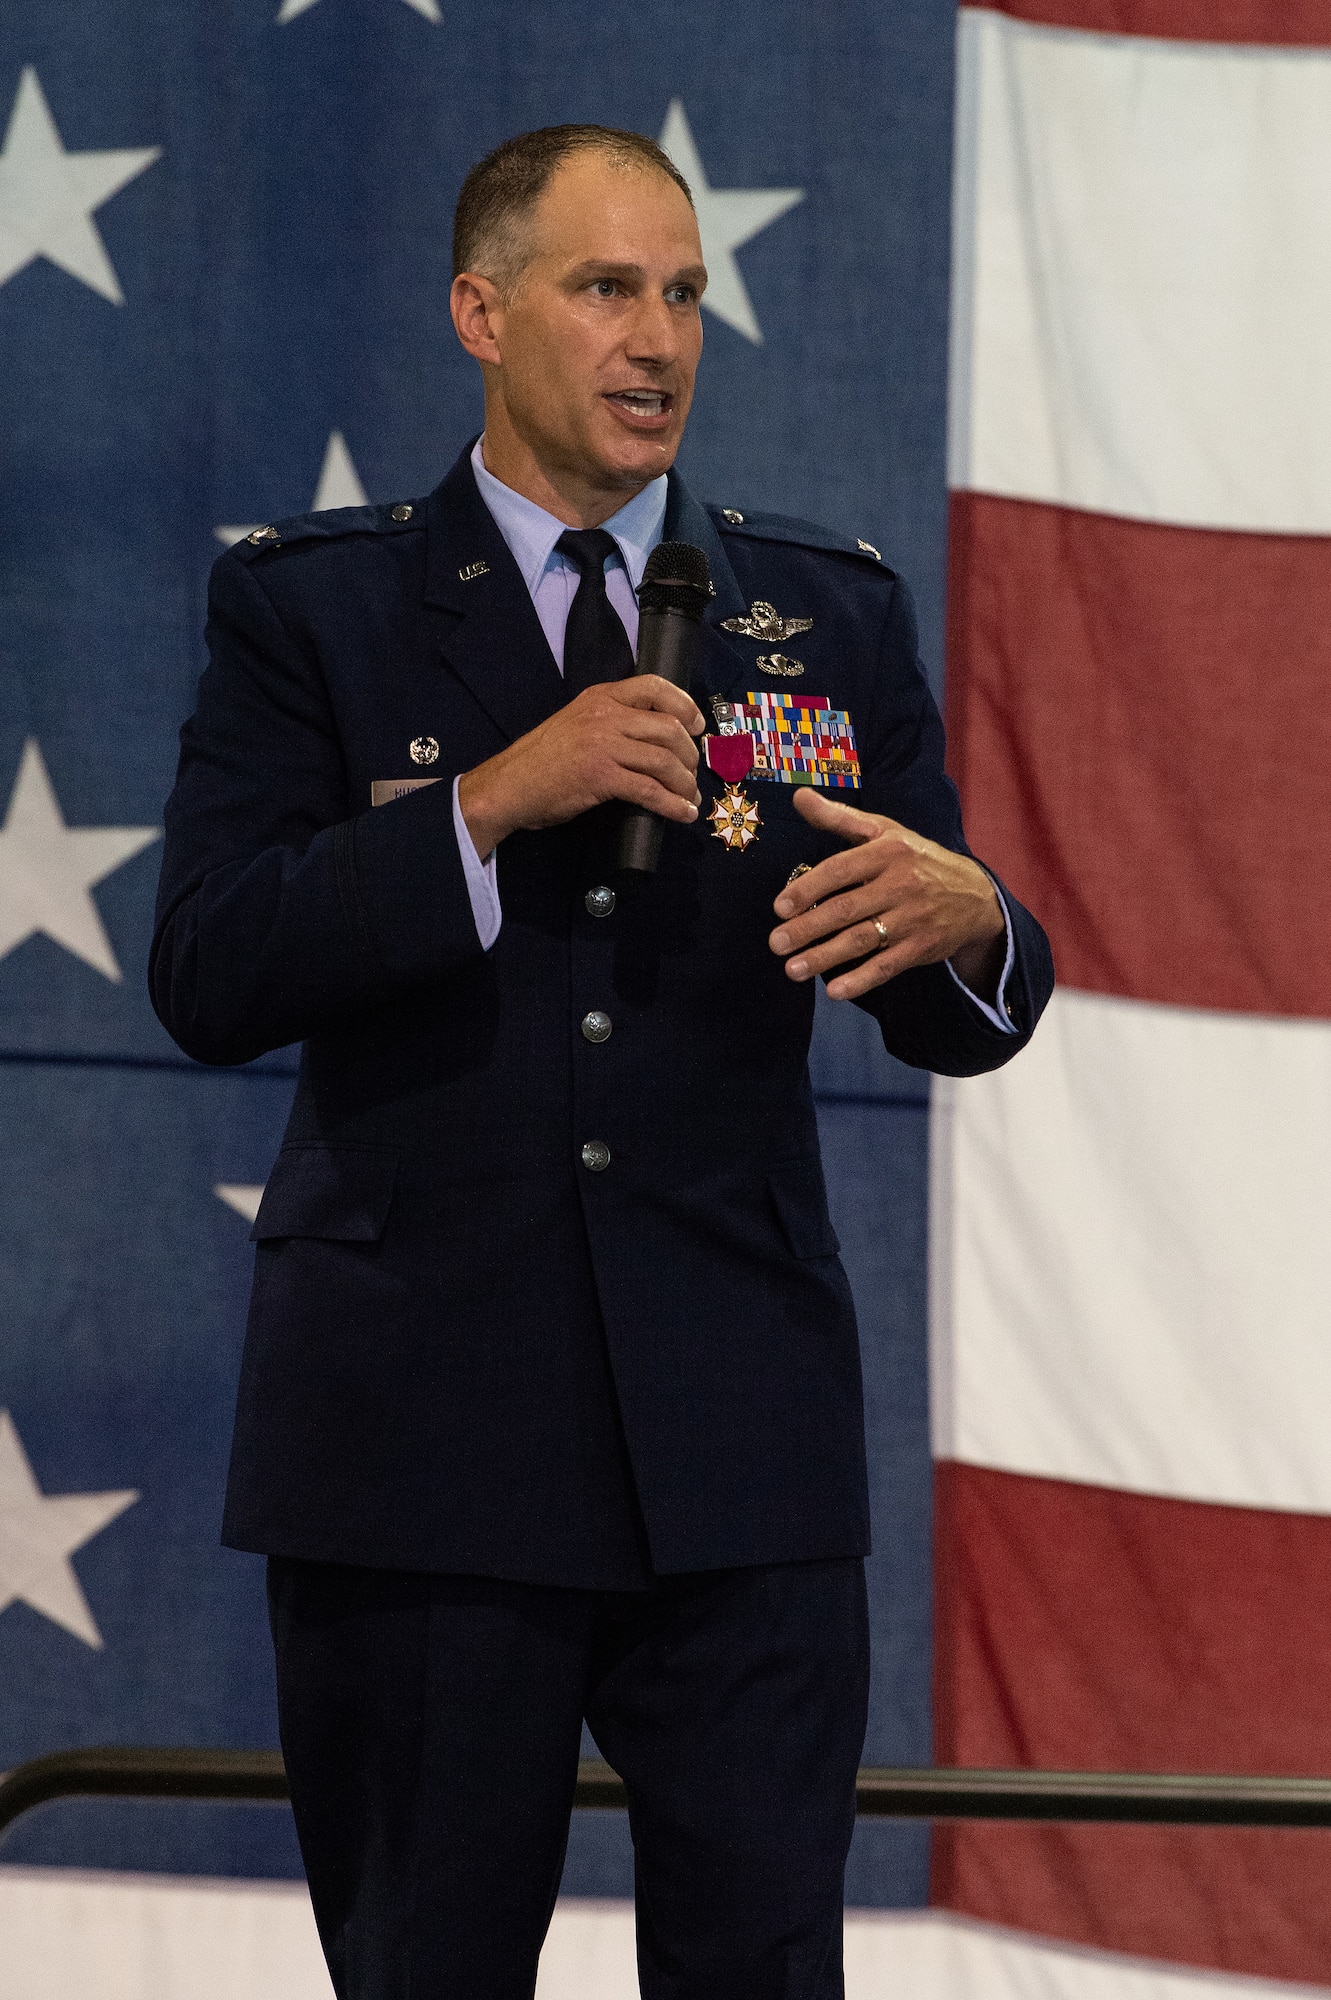 Col. Matthew S. Husemann, 436th Airlift Wing commander, gives final remarks to Team Dover members, friends, family, guests, civic leaders and congressional delegates in attendance during the 436th AW Change of Command ceremony held at Dover Air Force Base, Delaware, July 7, 2023. Maj. Gen. Corey J. Martin, 18th Air Force commander, presided over the ceremony in which Husemann relinquished command to Col. William C. McDonald, who became the wing’s 37th commander. (U.S. Air Force photo by Roland Balik)